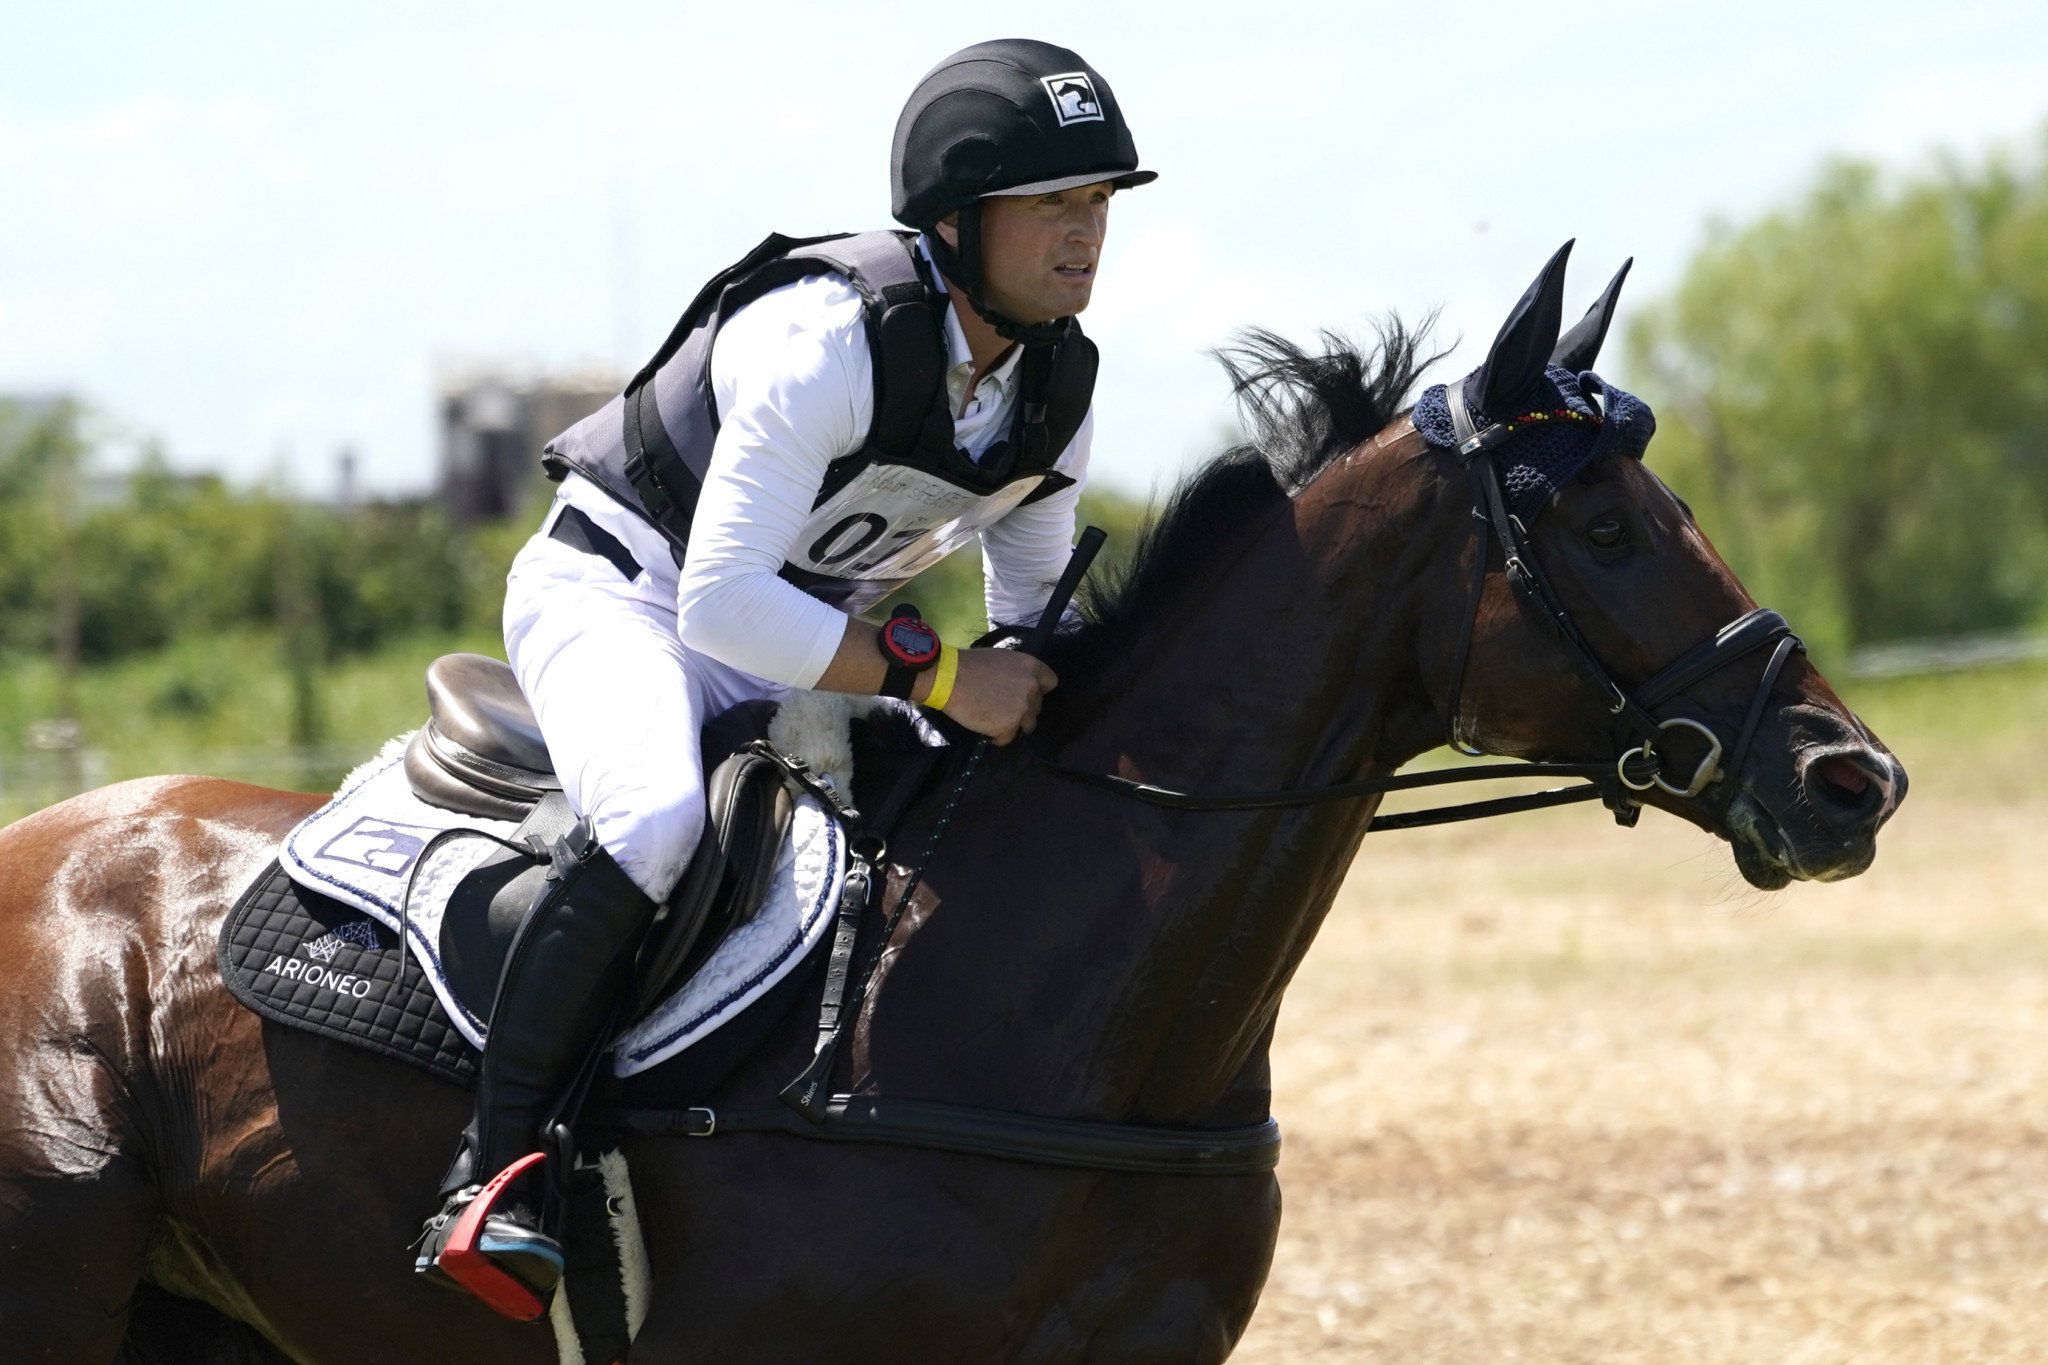 Jung and Klimke shine as Germany dominate European Eventing Championships